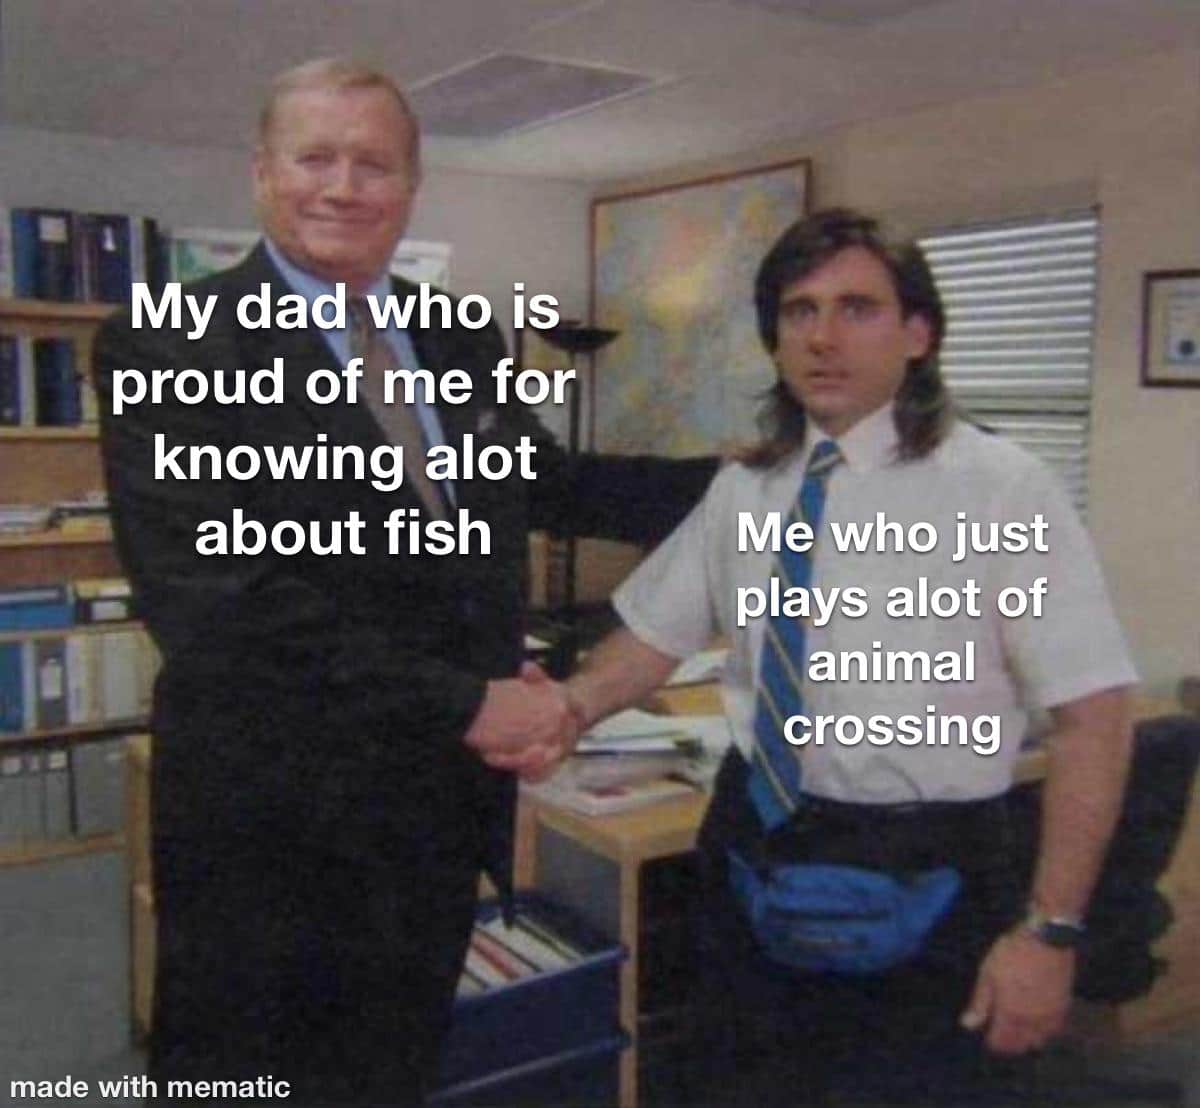 Wholesome memes, No Wholesome Memes Wholesome memes, No text: y dad W o is proud  me or knowing lot about fish made with mematic Me ho just plays alot of ÅnimaI crossing 